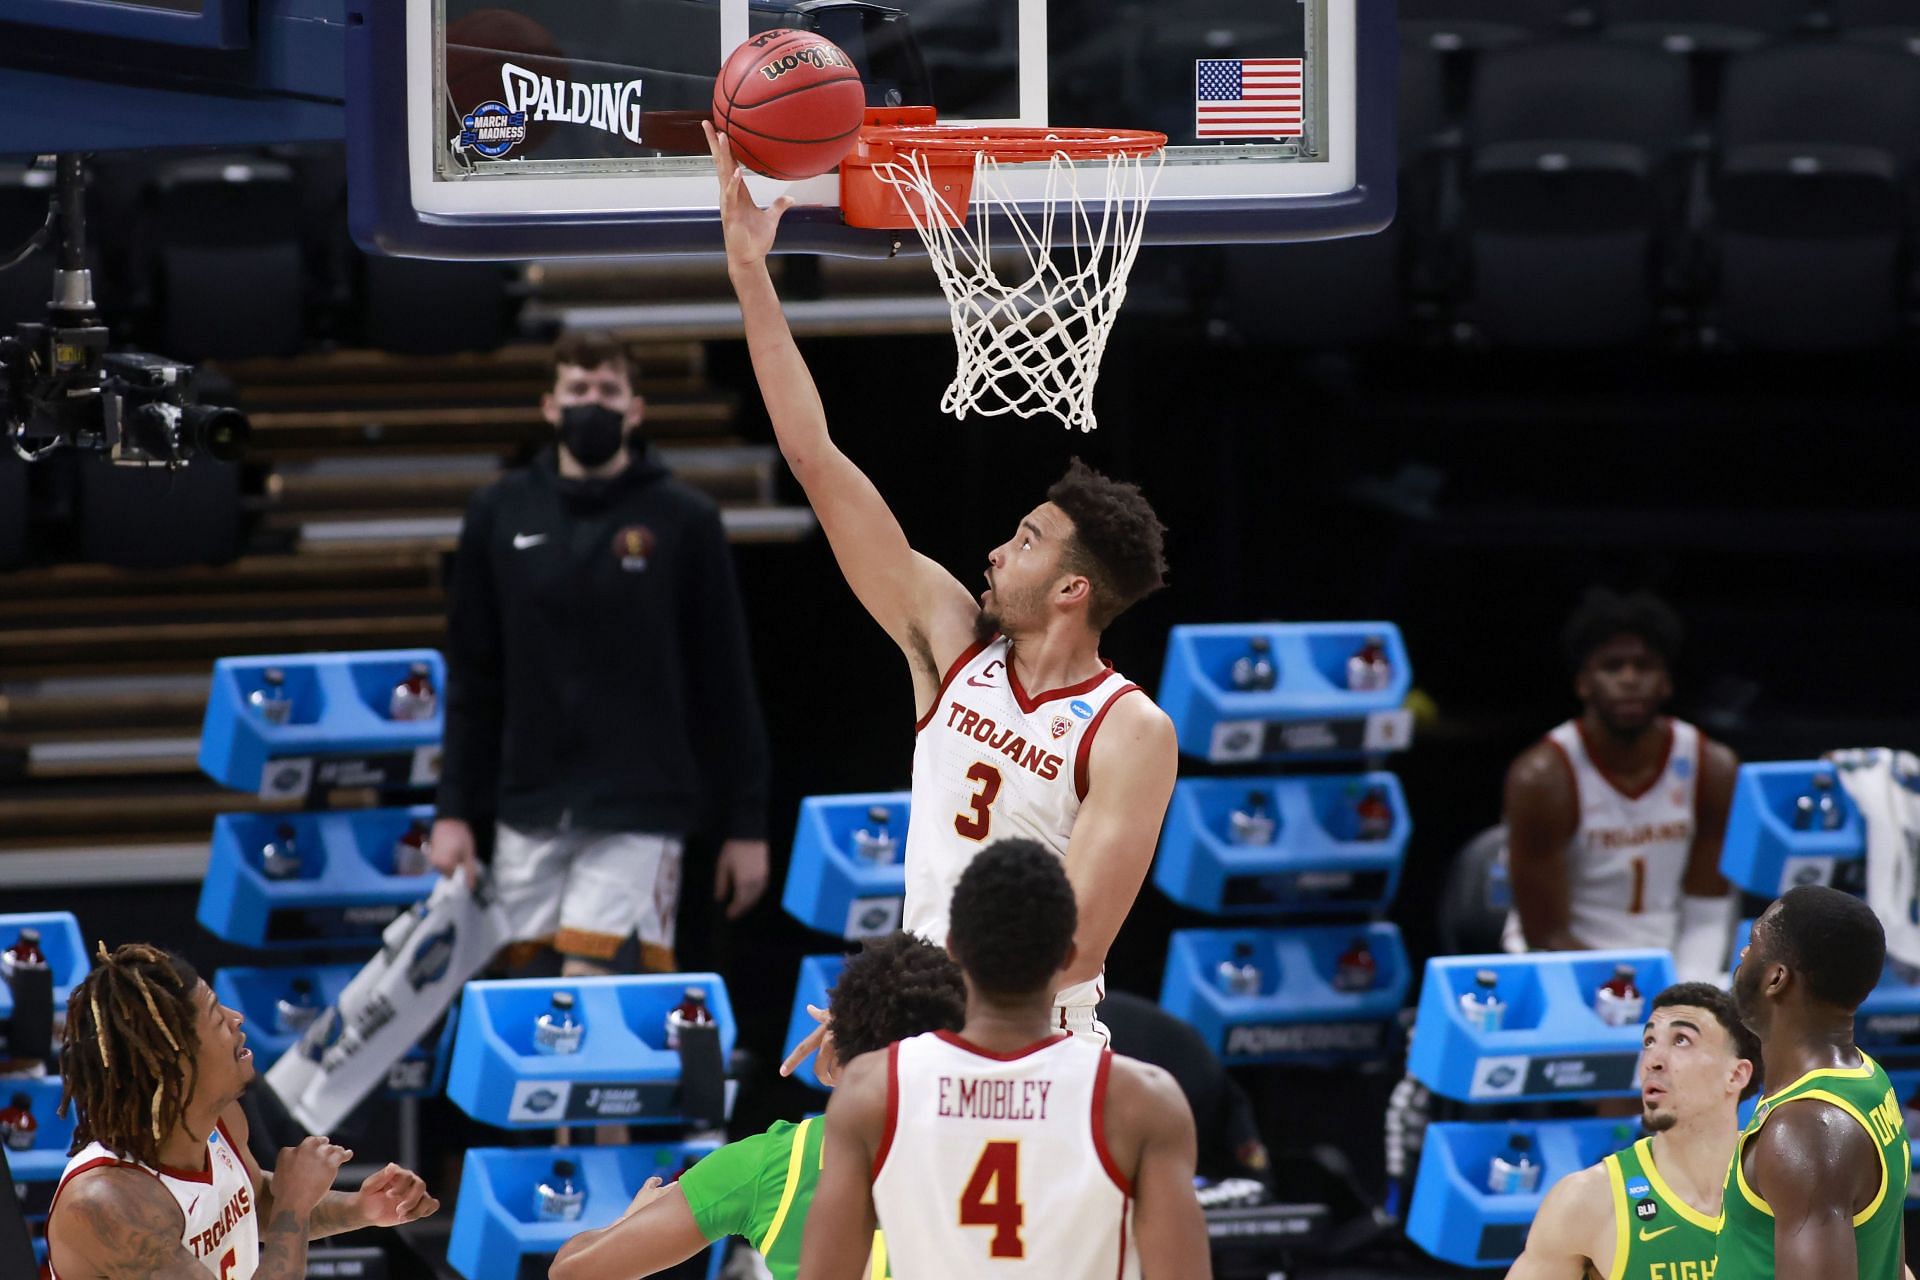 USC's Isaiah Mobley Selected By Cleveland Cavaliers In 2022 NBA